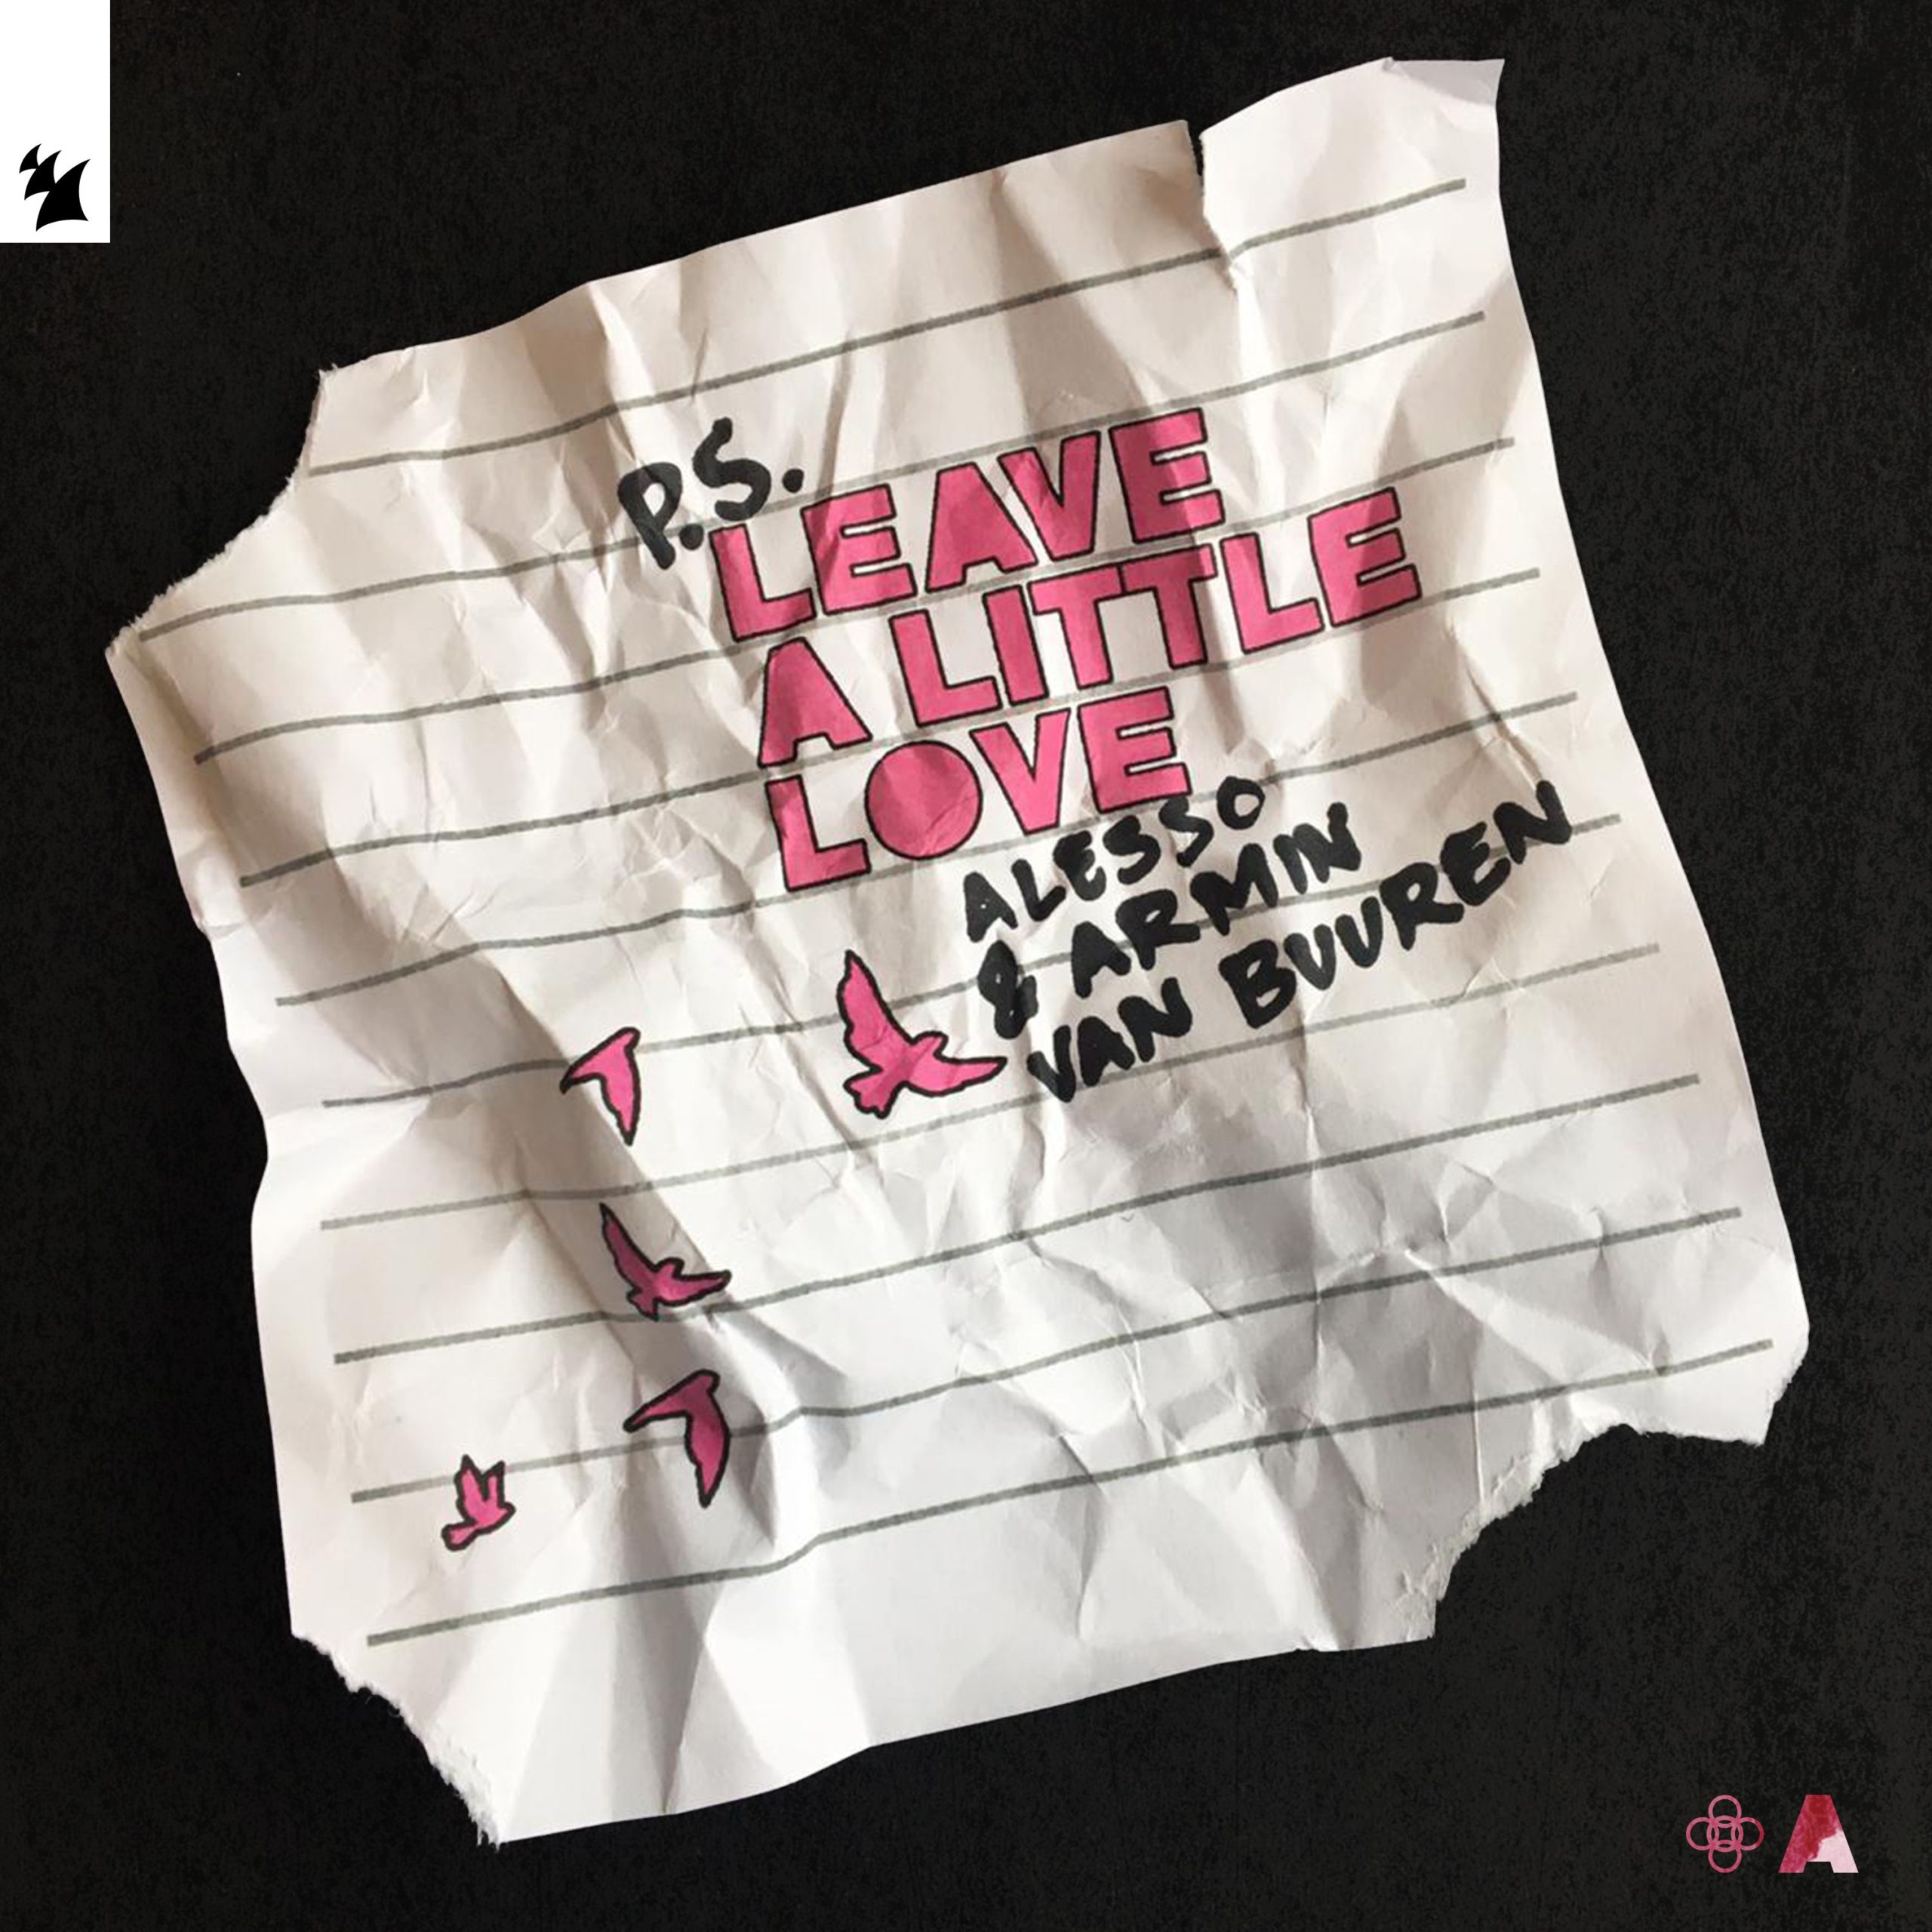 Alesso and Armin van Buuren presents Leave A Little Love on Armada Music